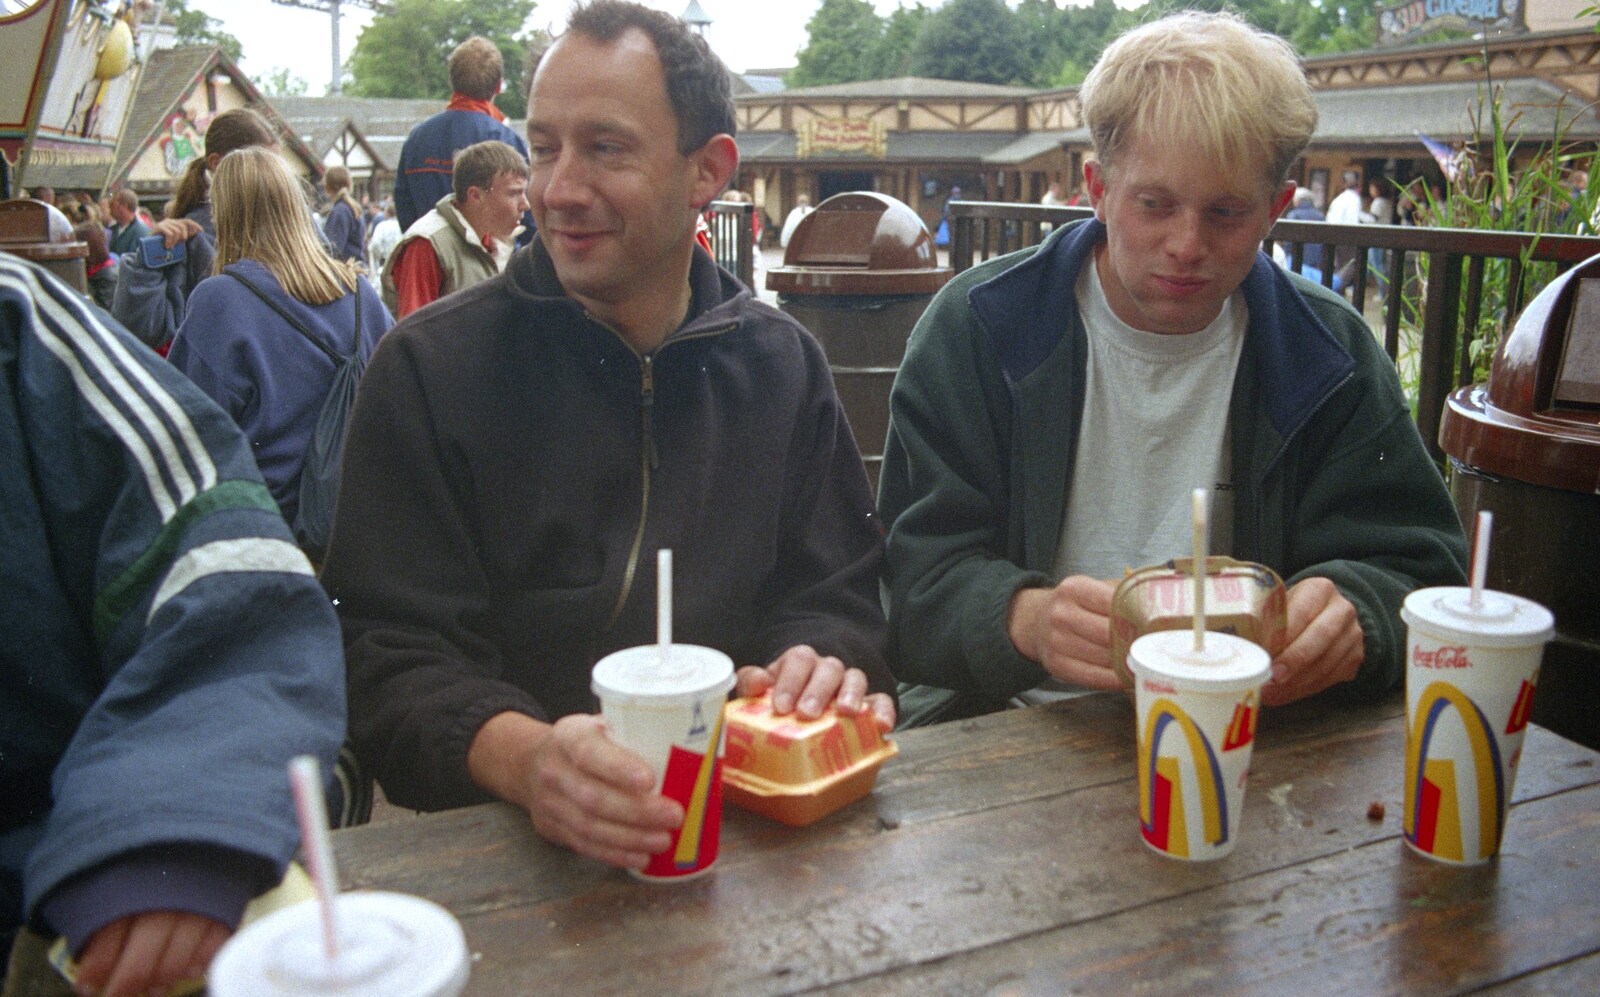 A Trip to Alton Towers, Staffordshire - 15th June 2000: DH and Paul eat fast food. Paul looks a bit stuffed